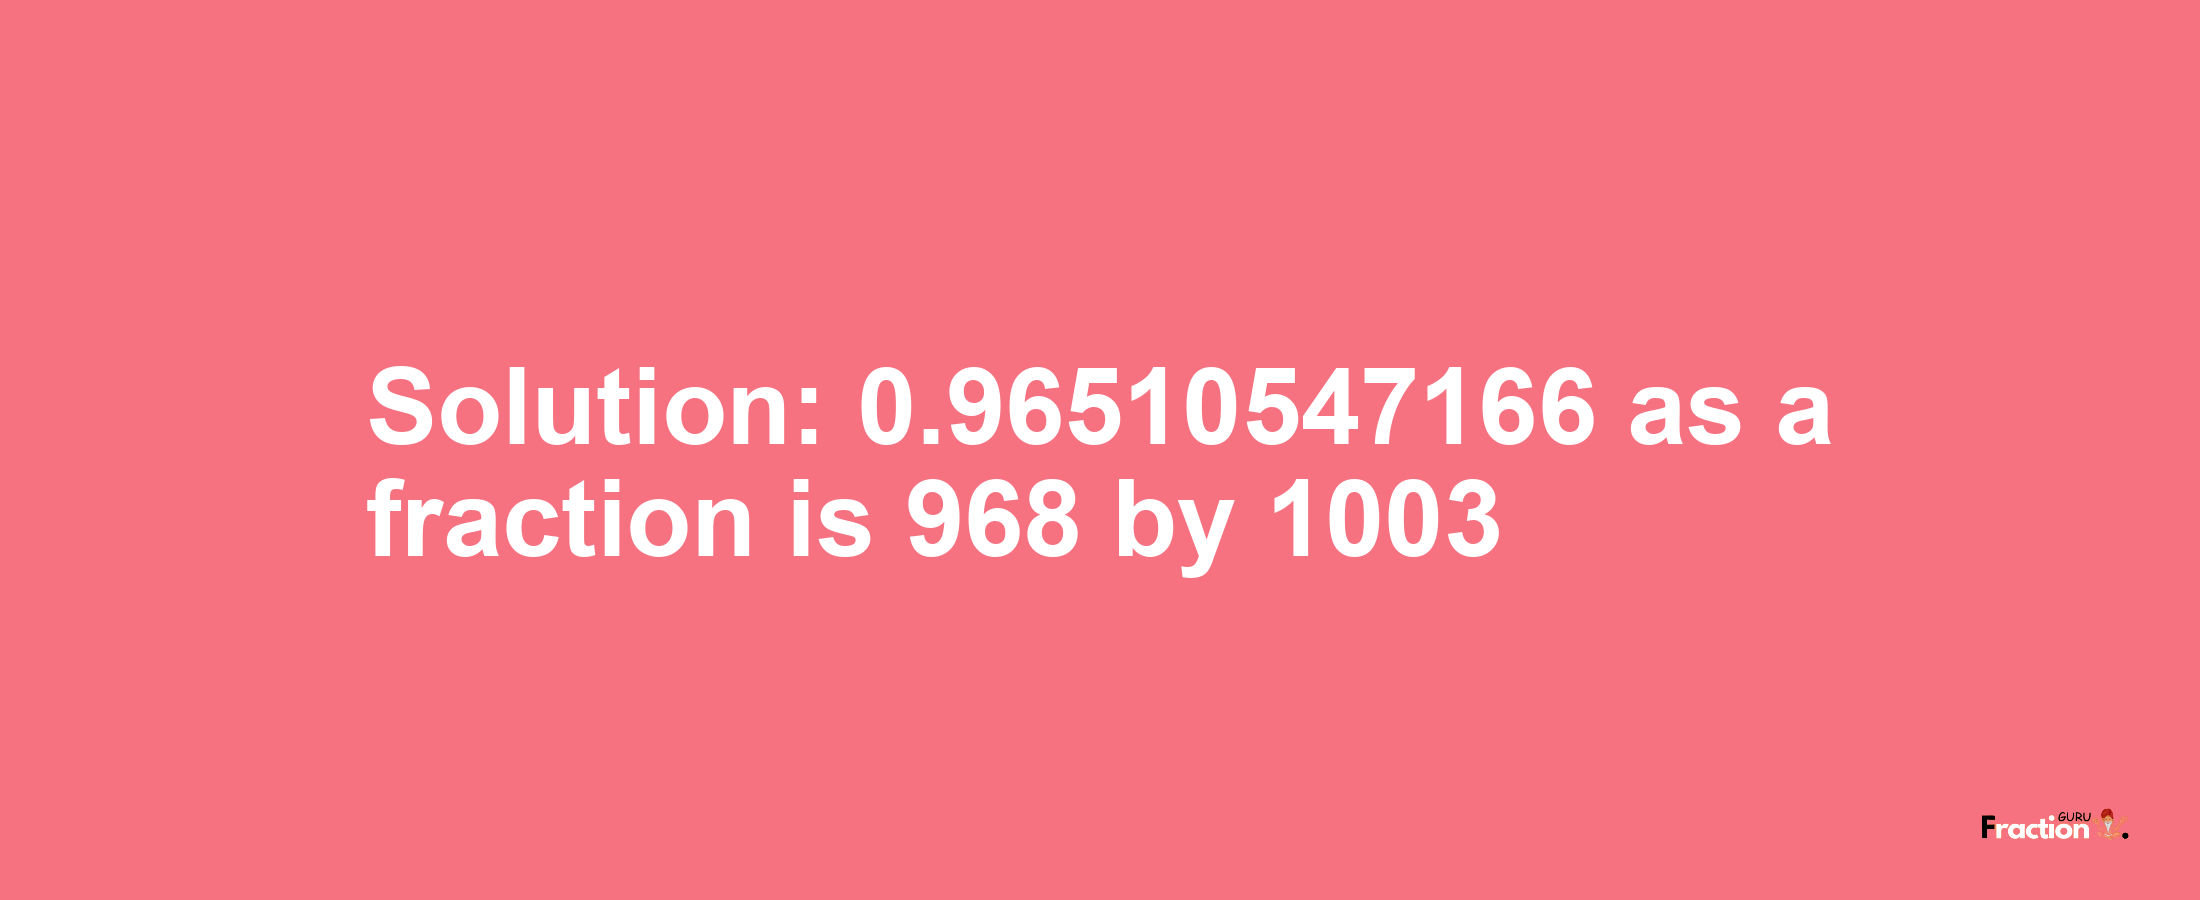 Solution:0.96510547166 as a fraction is 968/1003